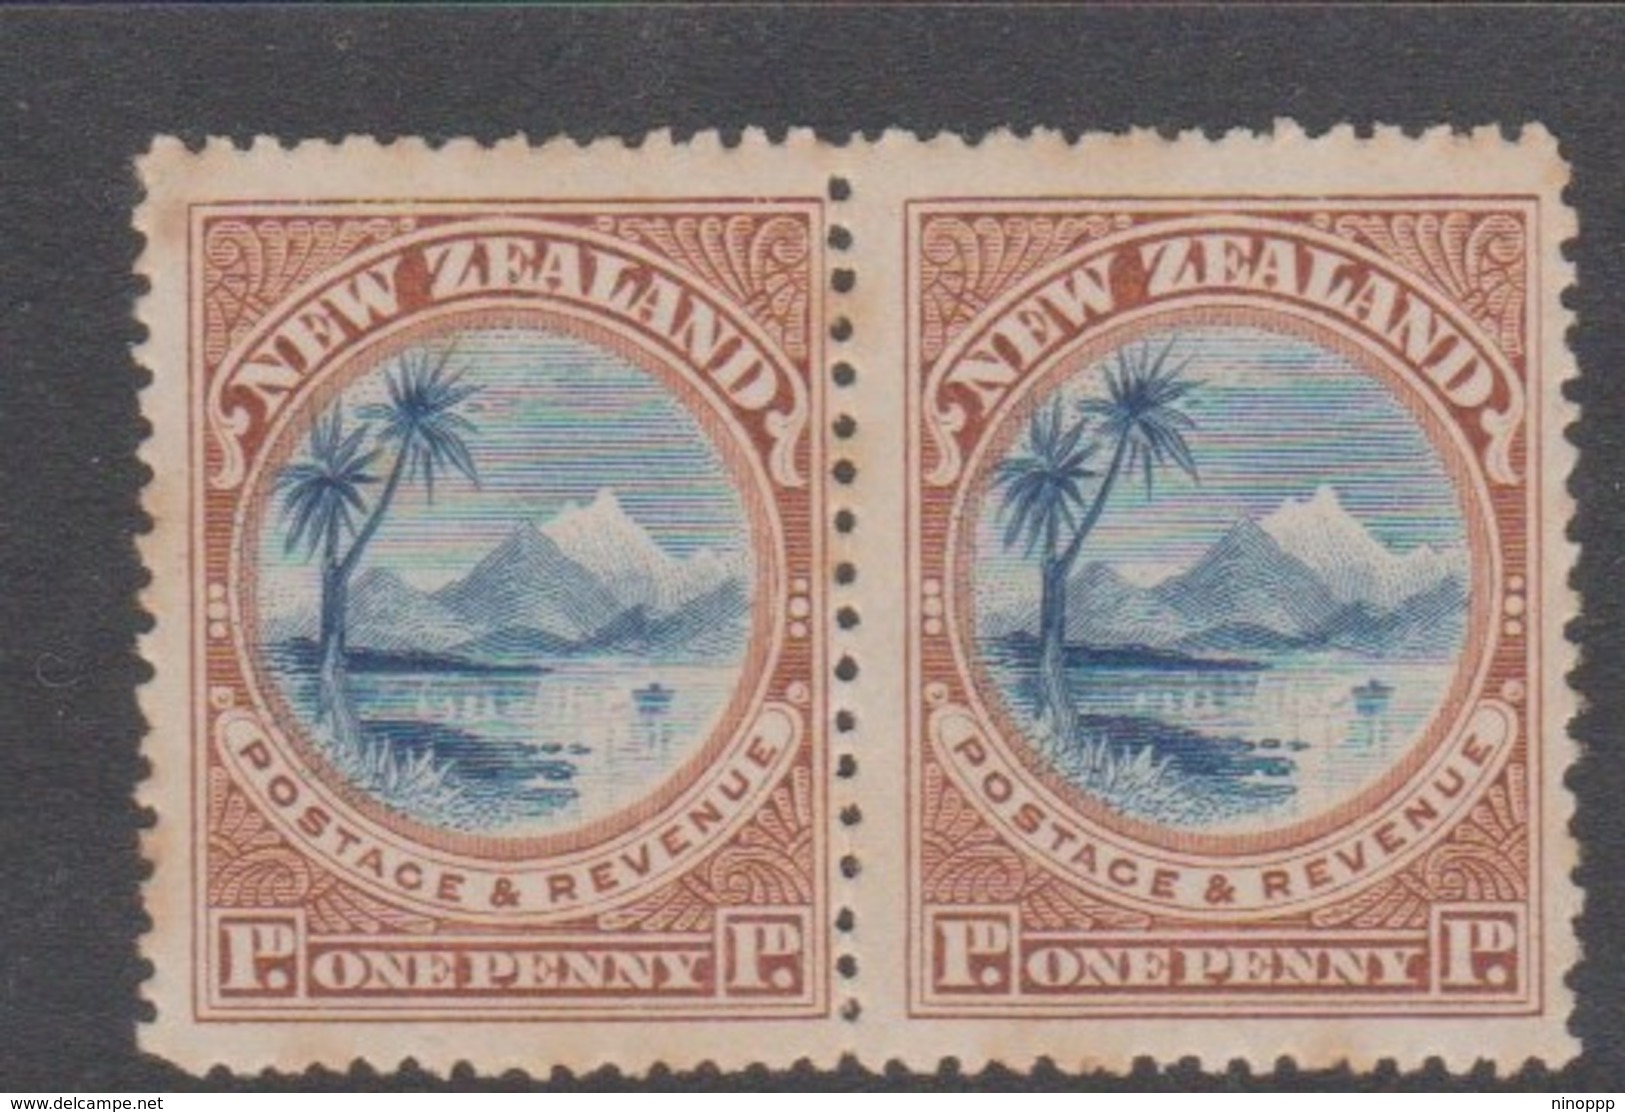 New Zealand SG 247 1898 One Penny Lake Taupo,pair Mint Never Hinged,mint Never Hinged - Unused Stamps